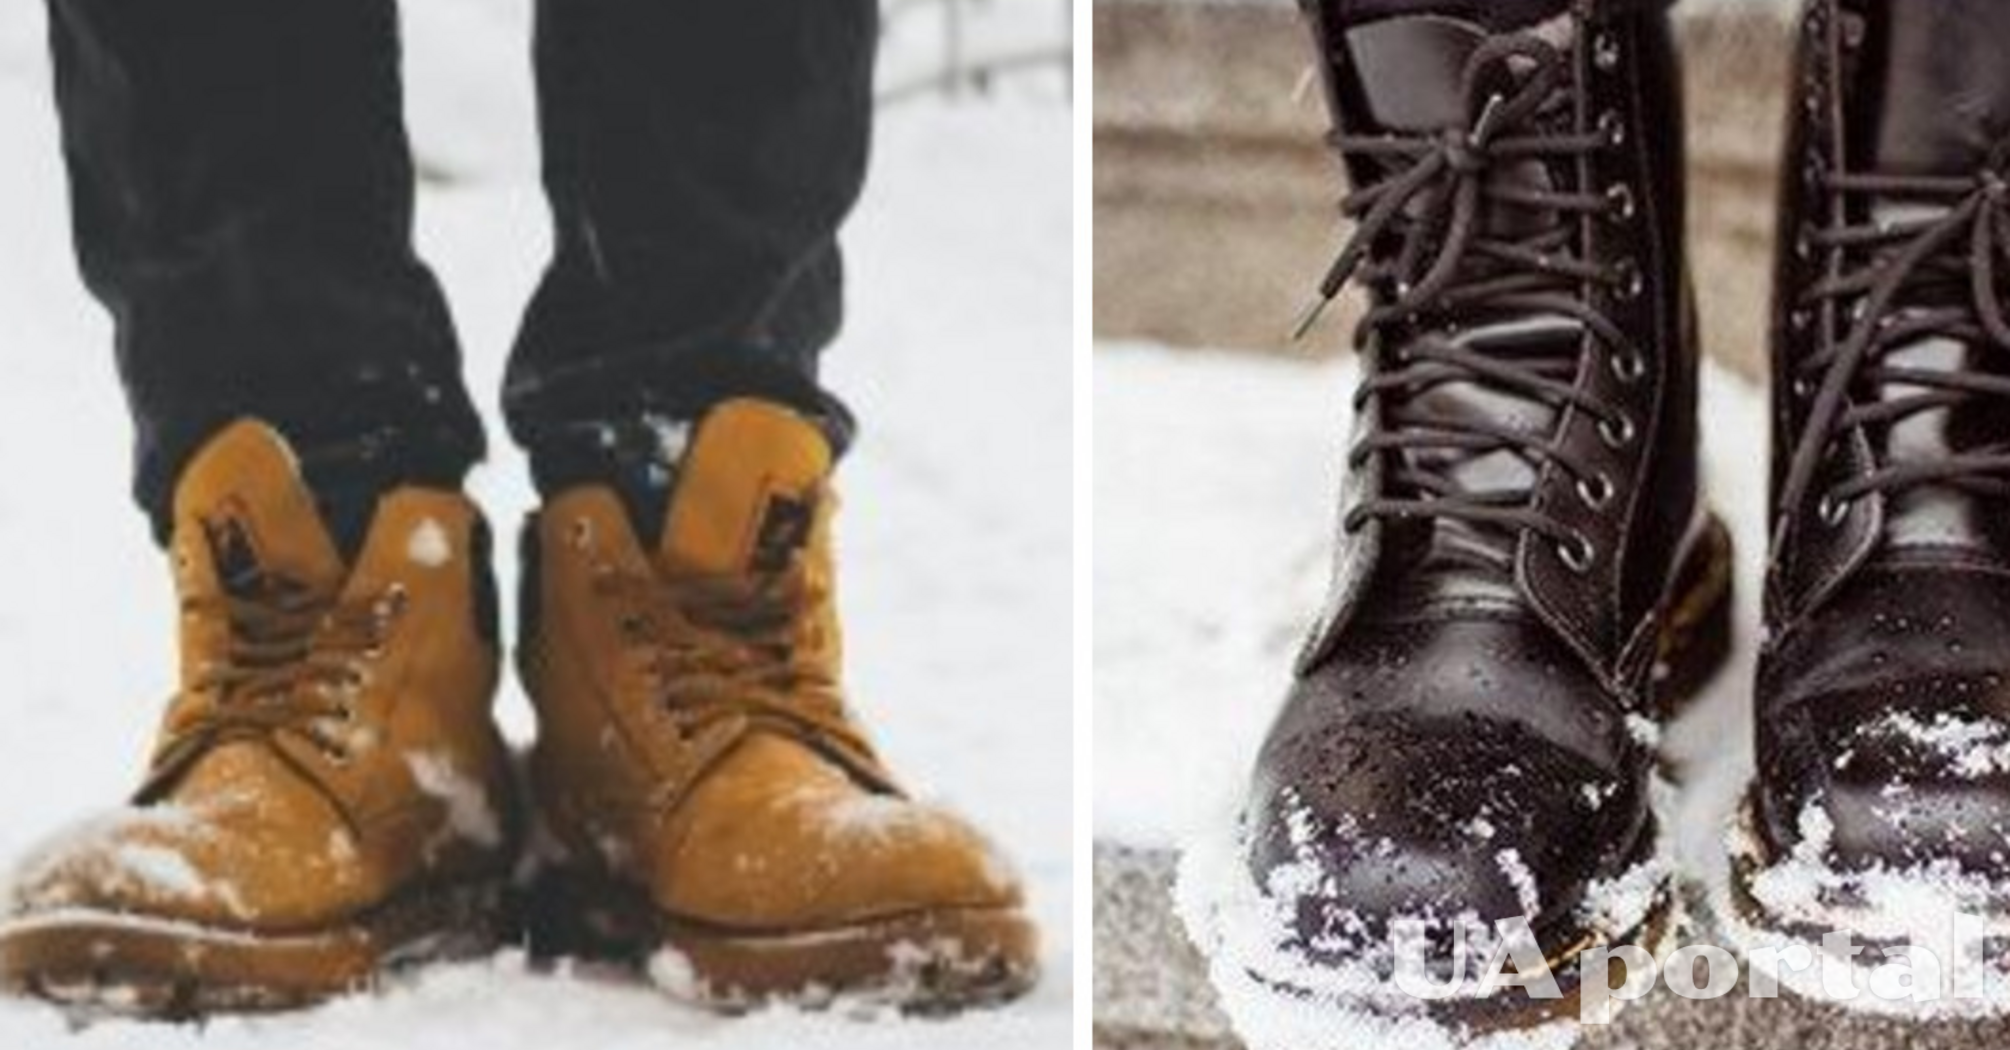 How to make winter shoes anti-slip: a life hack with hairspray